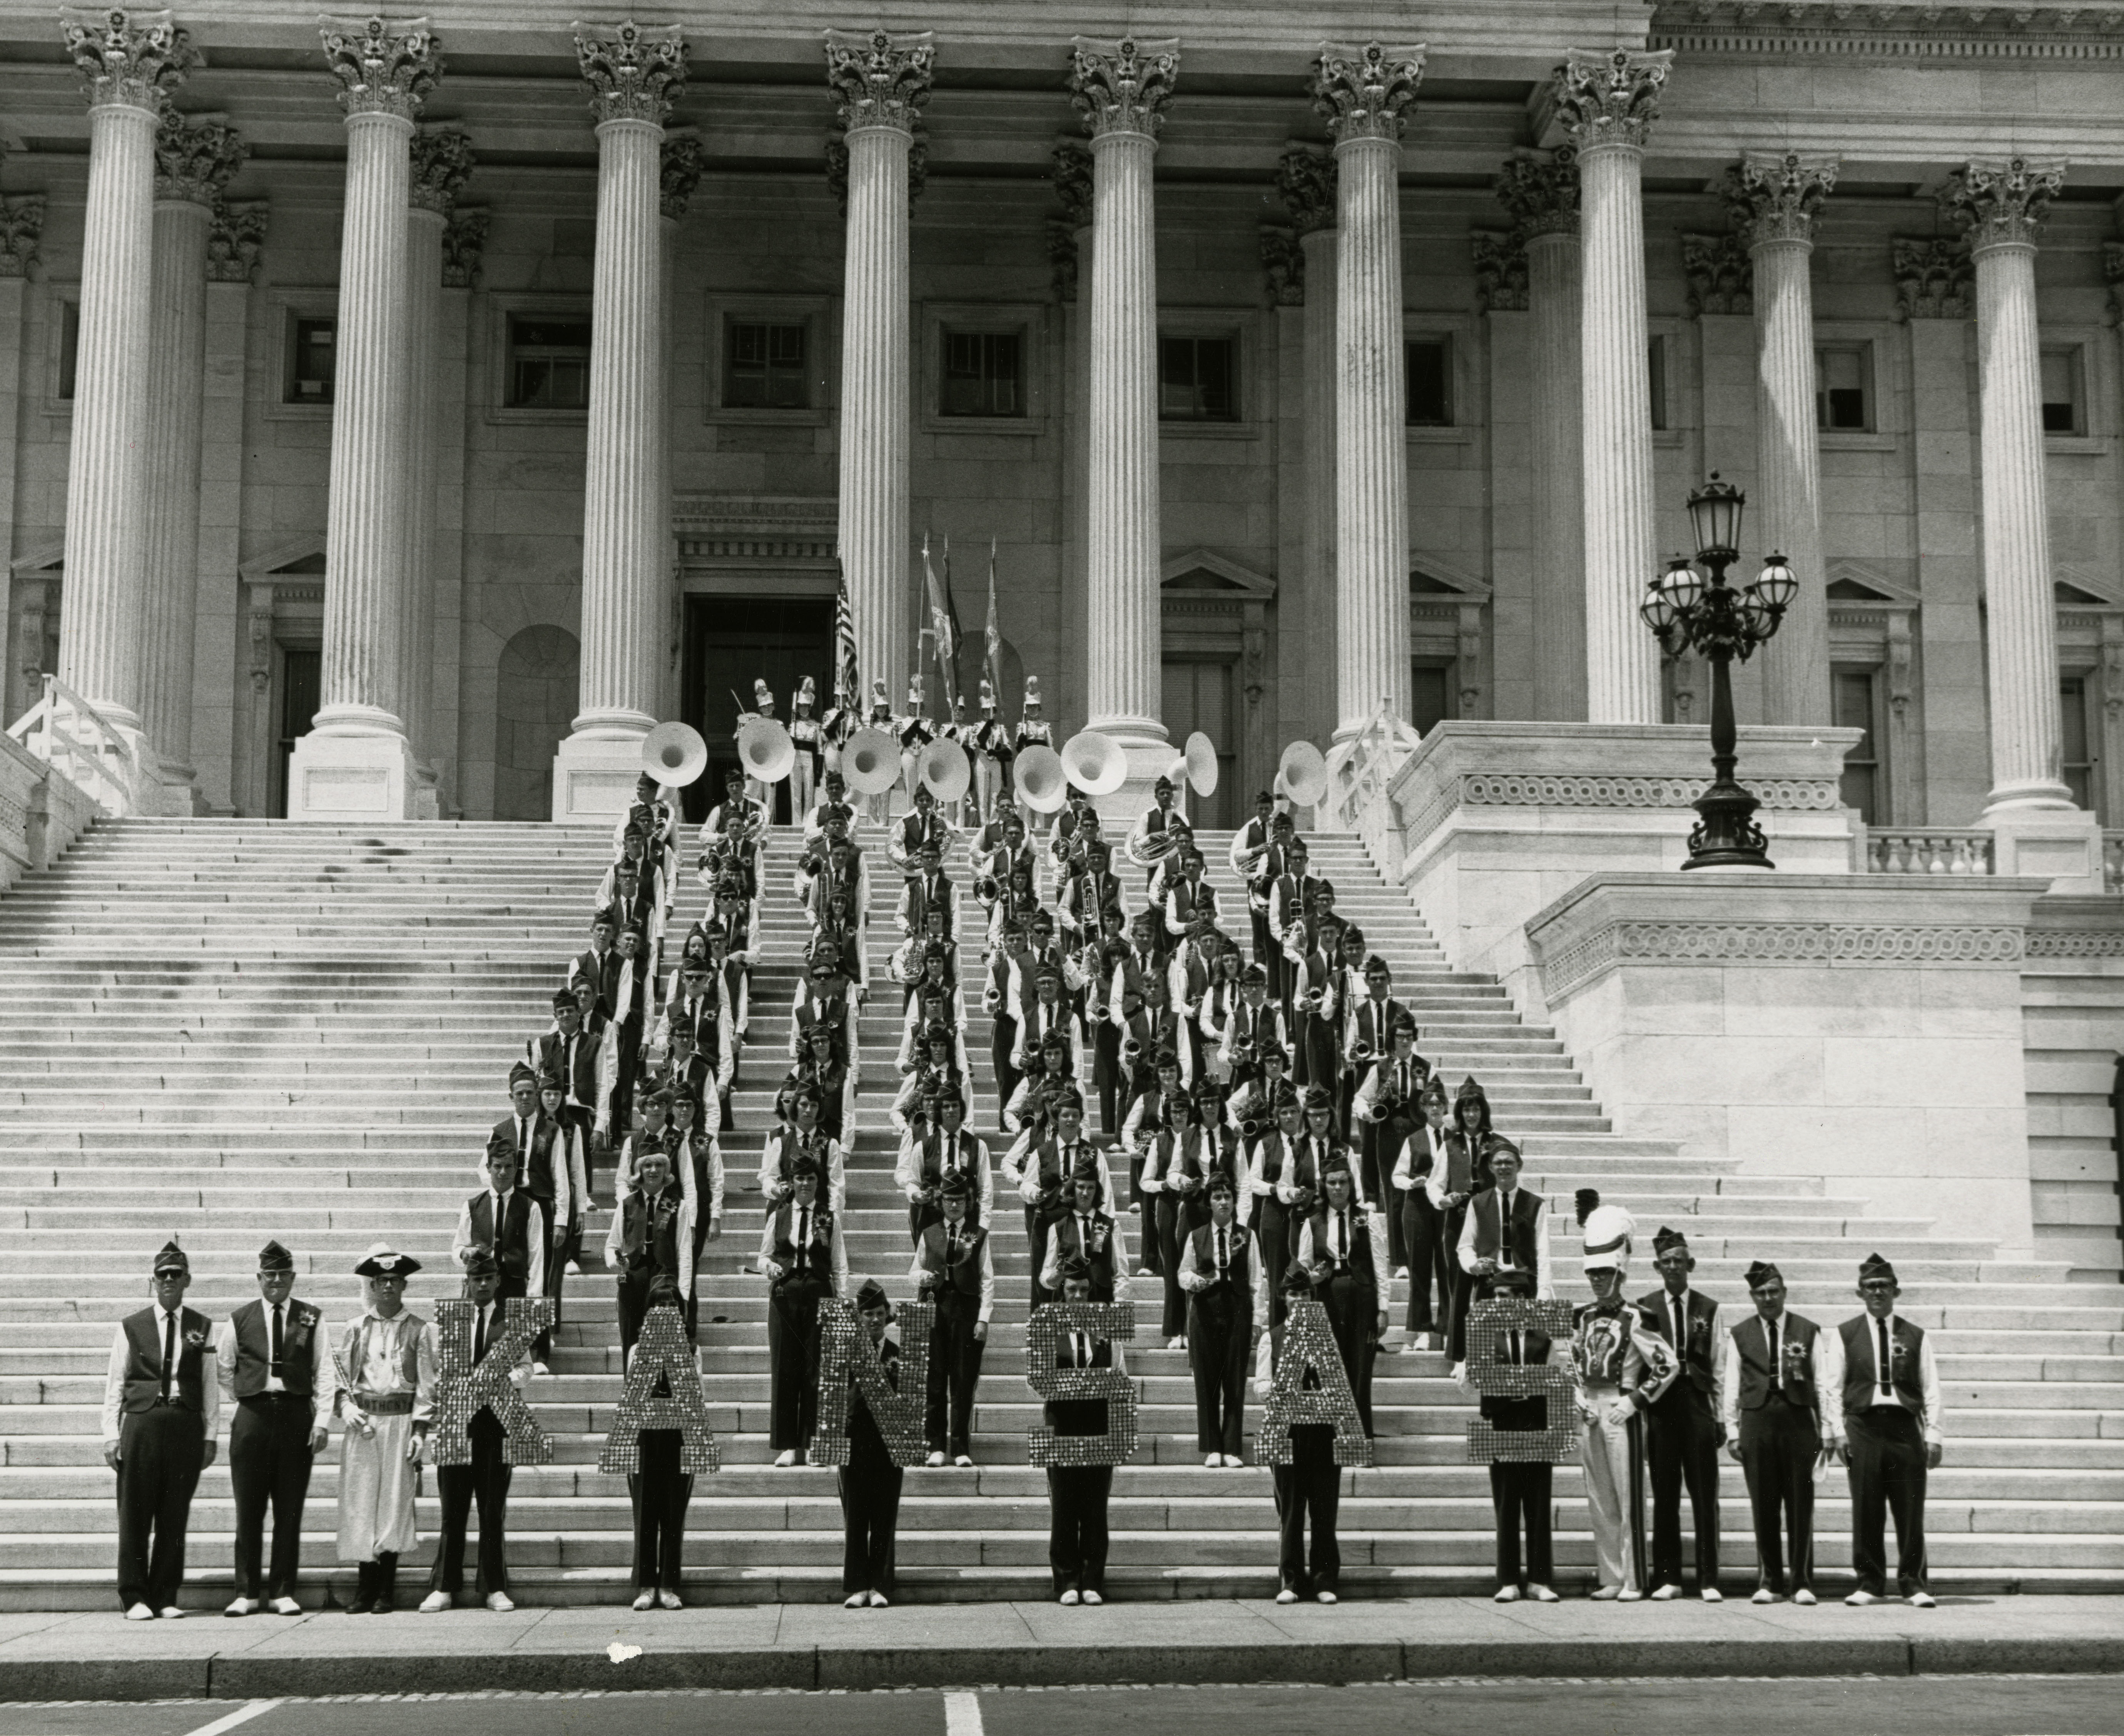 The All Kansas Lions International Convention Band on July 8, 1966.